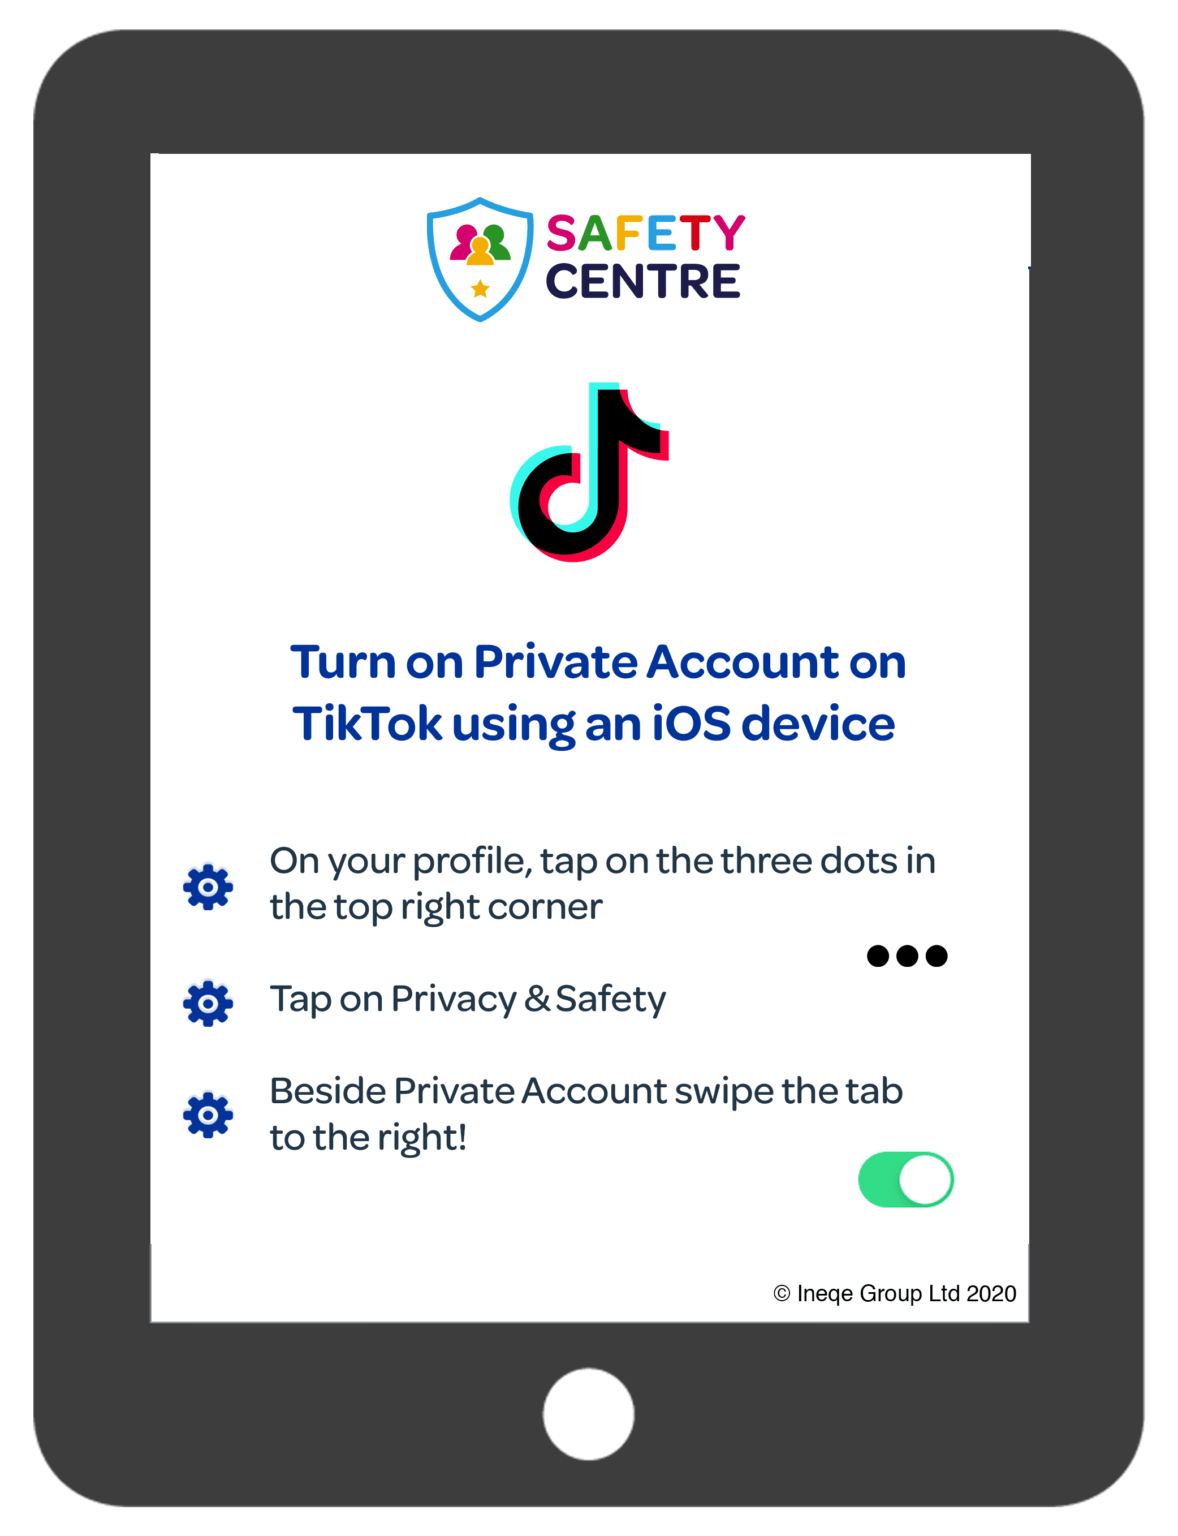 iOS & Android Privacy TikTok Our Safety Centre